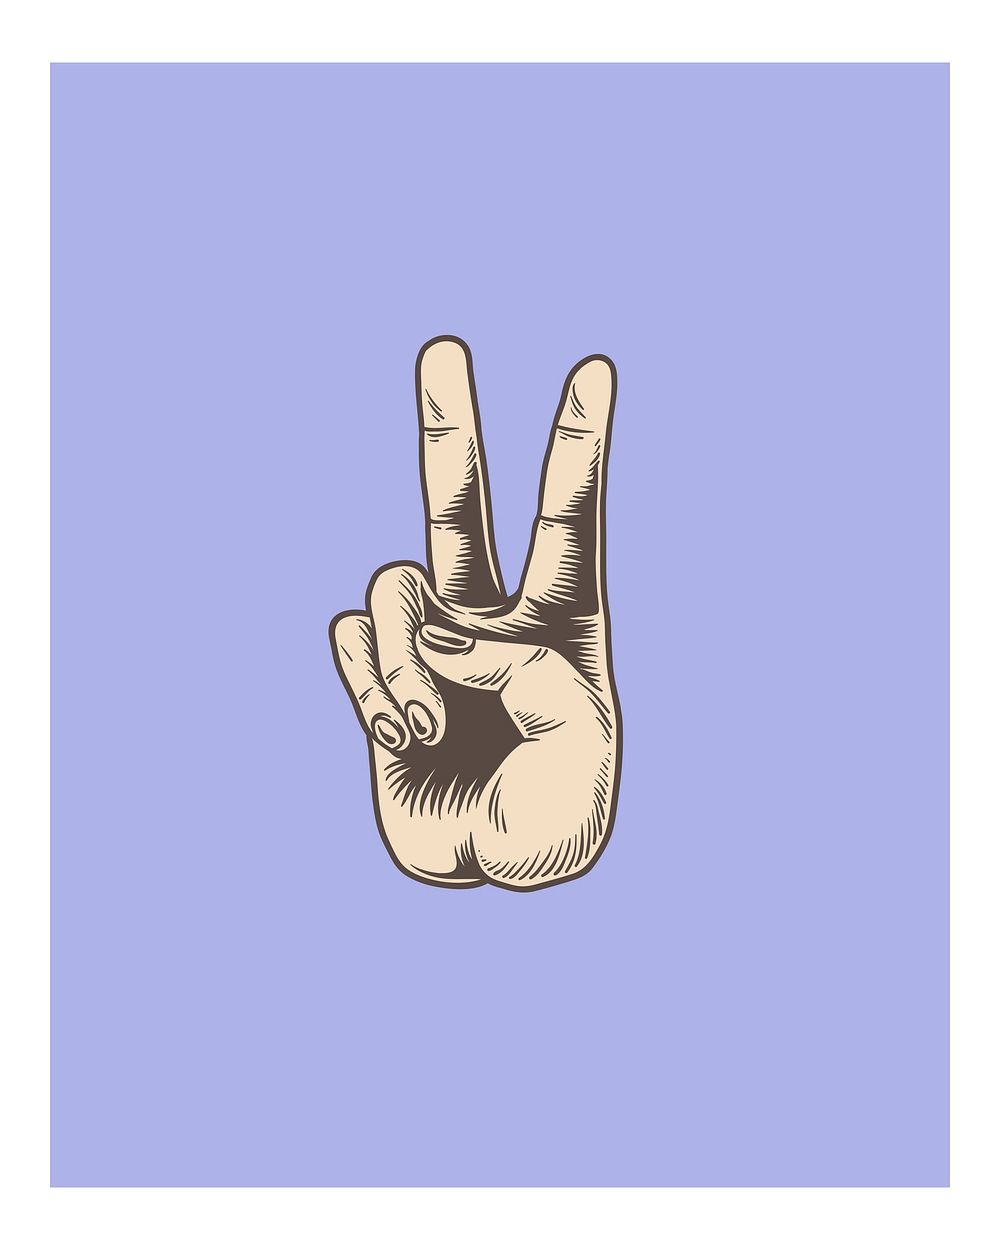 Hand peace sign illustration wall art print and poster.